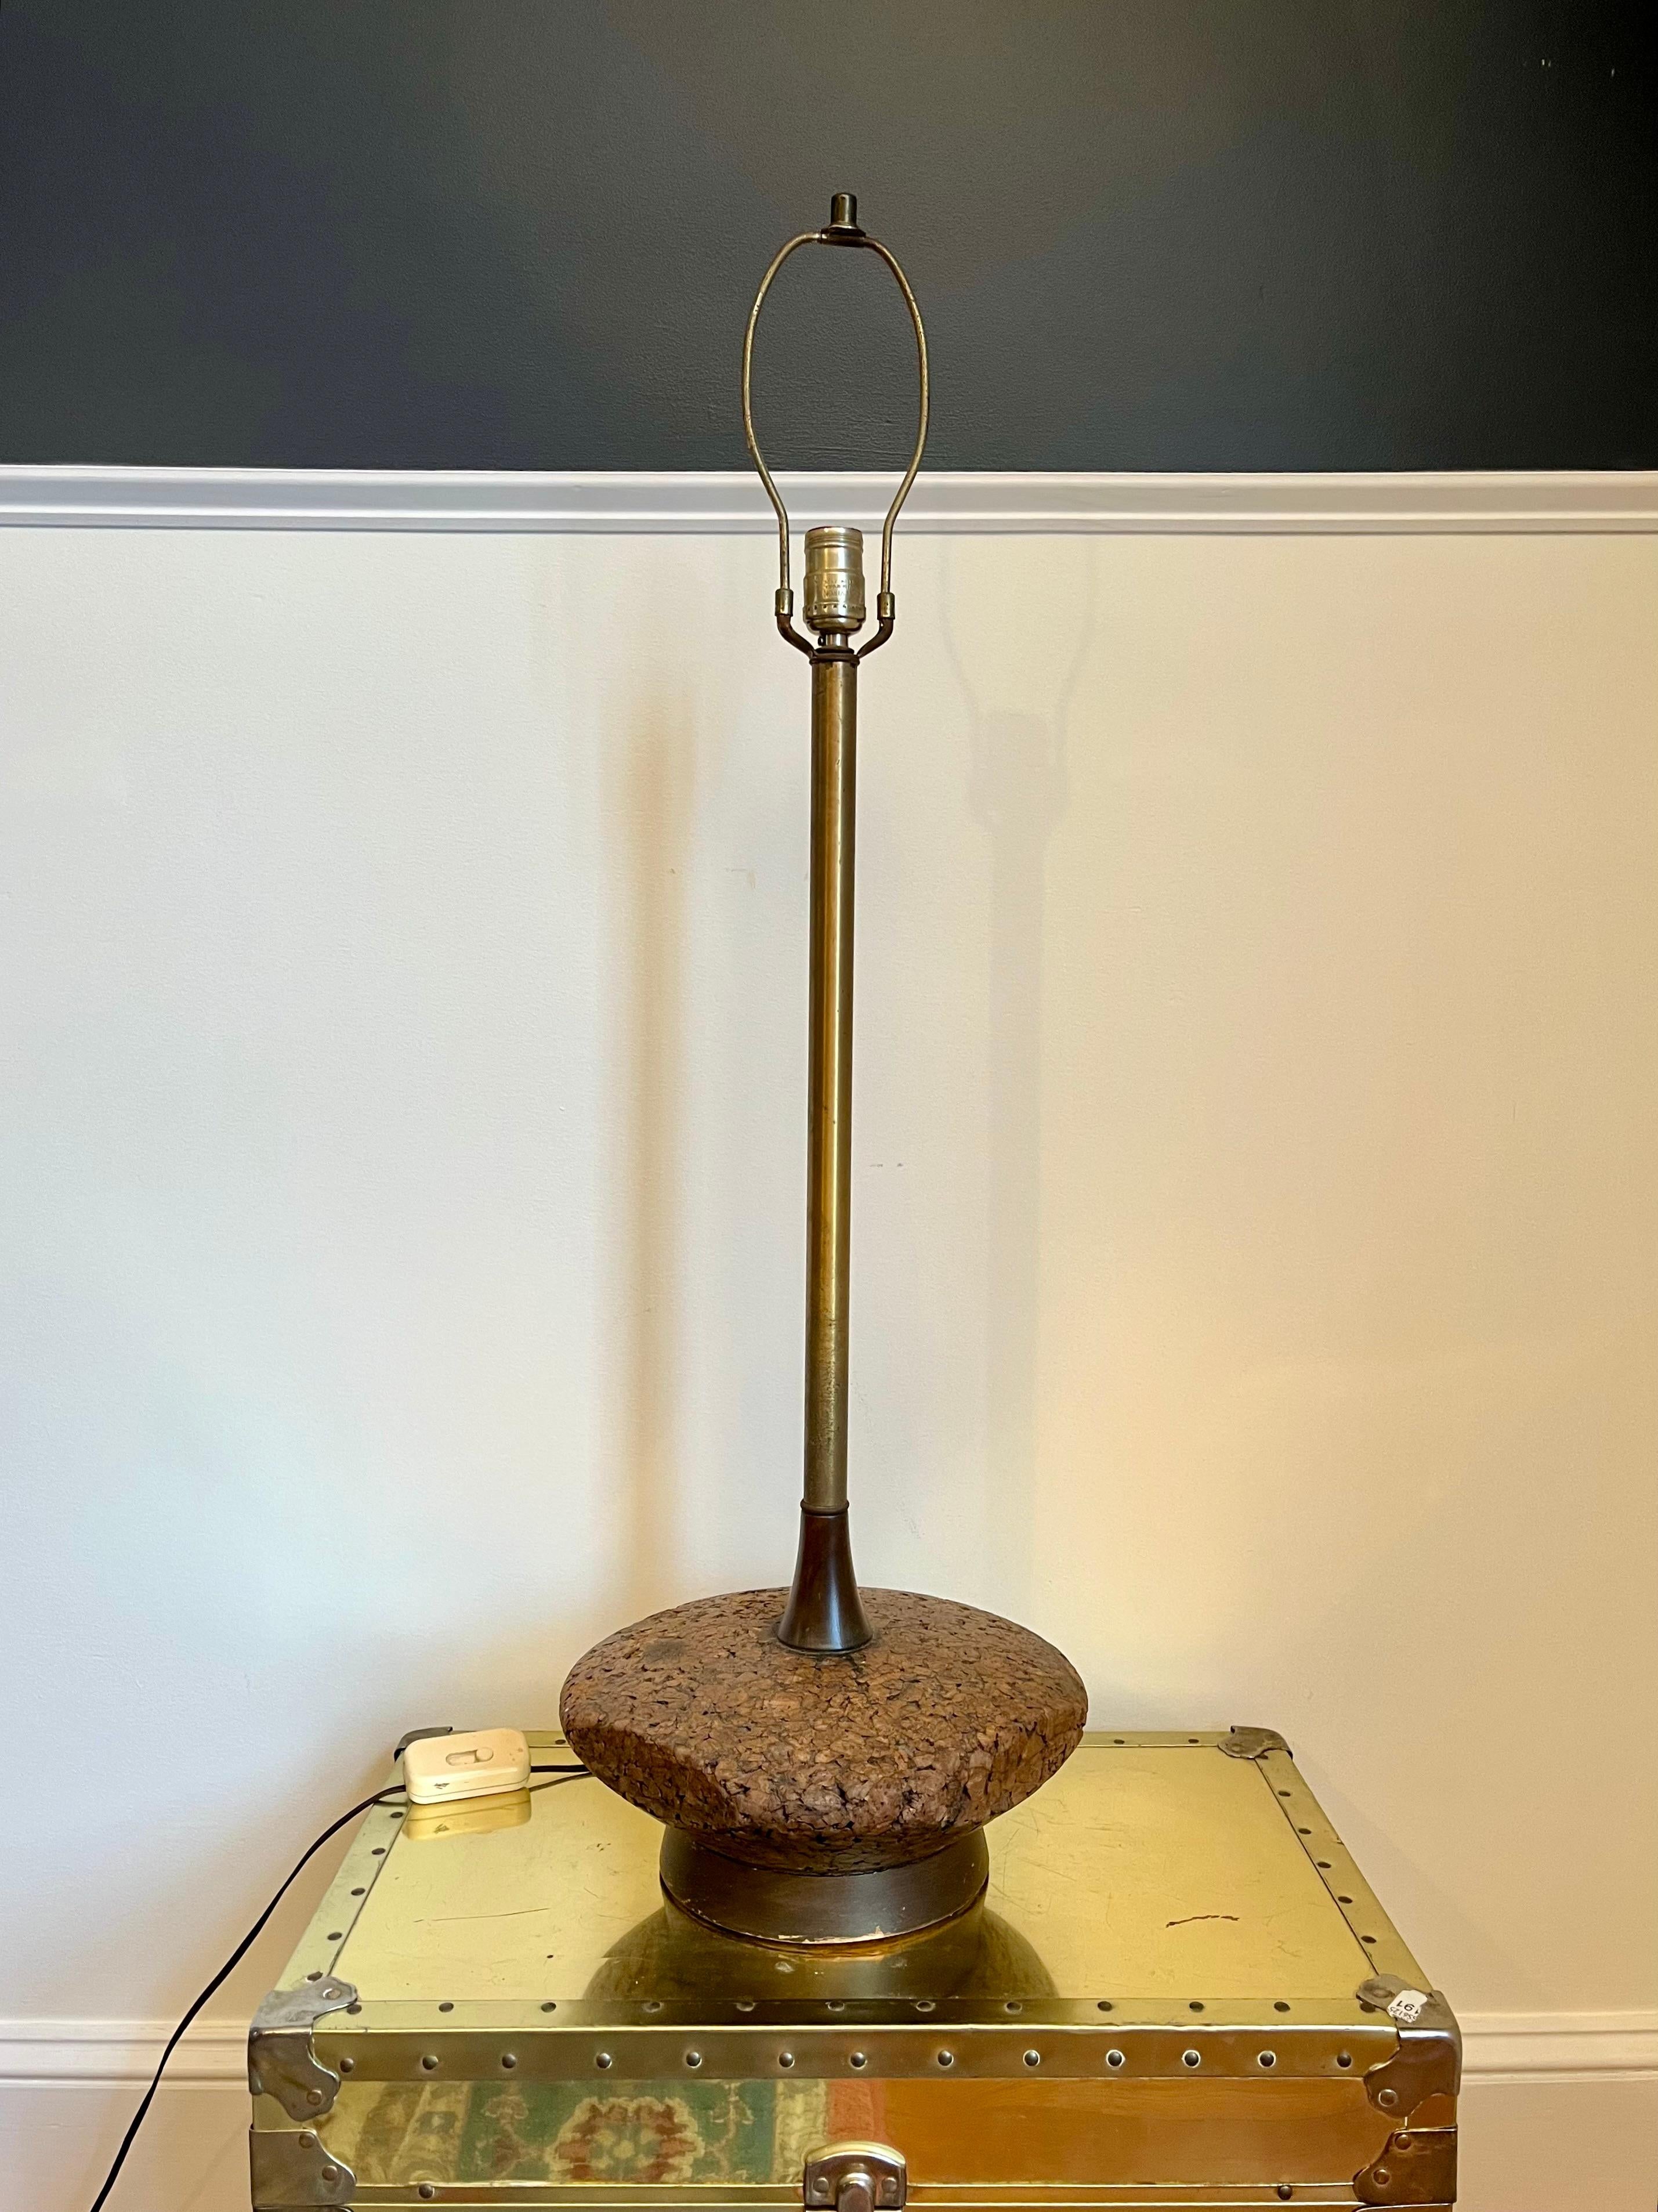 Striking Sculptural Danish Modern Lamp in Cork and Walnut Wood base. Manufactures label, LYNARD of CALIFORNIA and SEPTOR. Streamline appearance. Totally mid century mod.
Original Unrestored Vintage Condition. Please refer to the images.